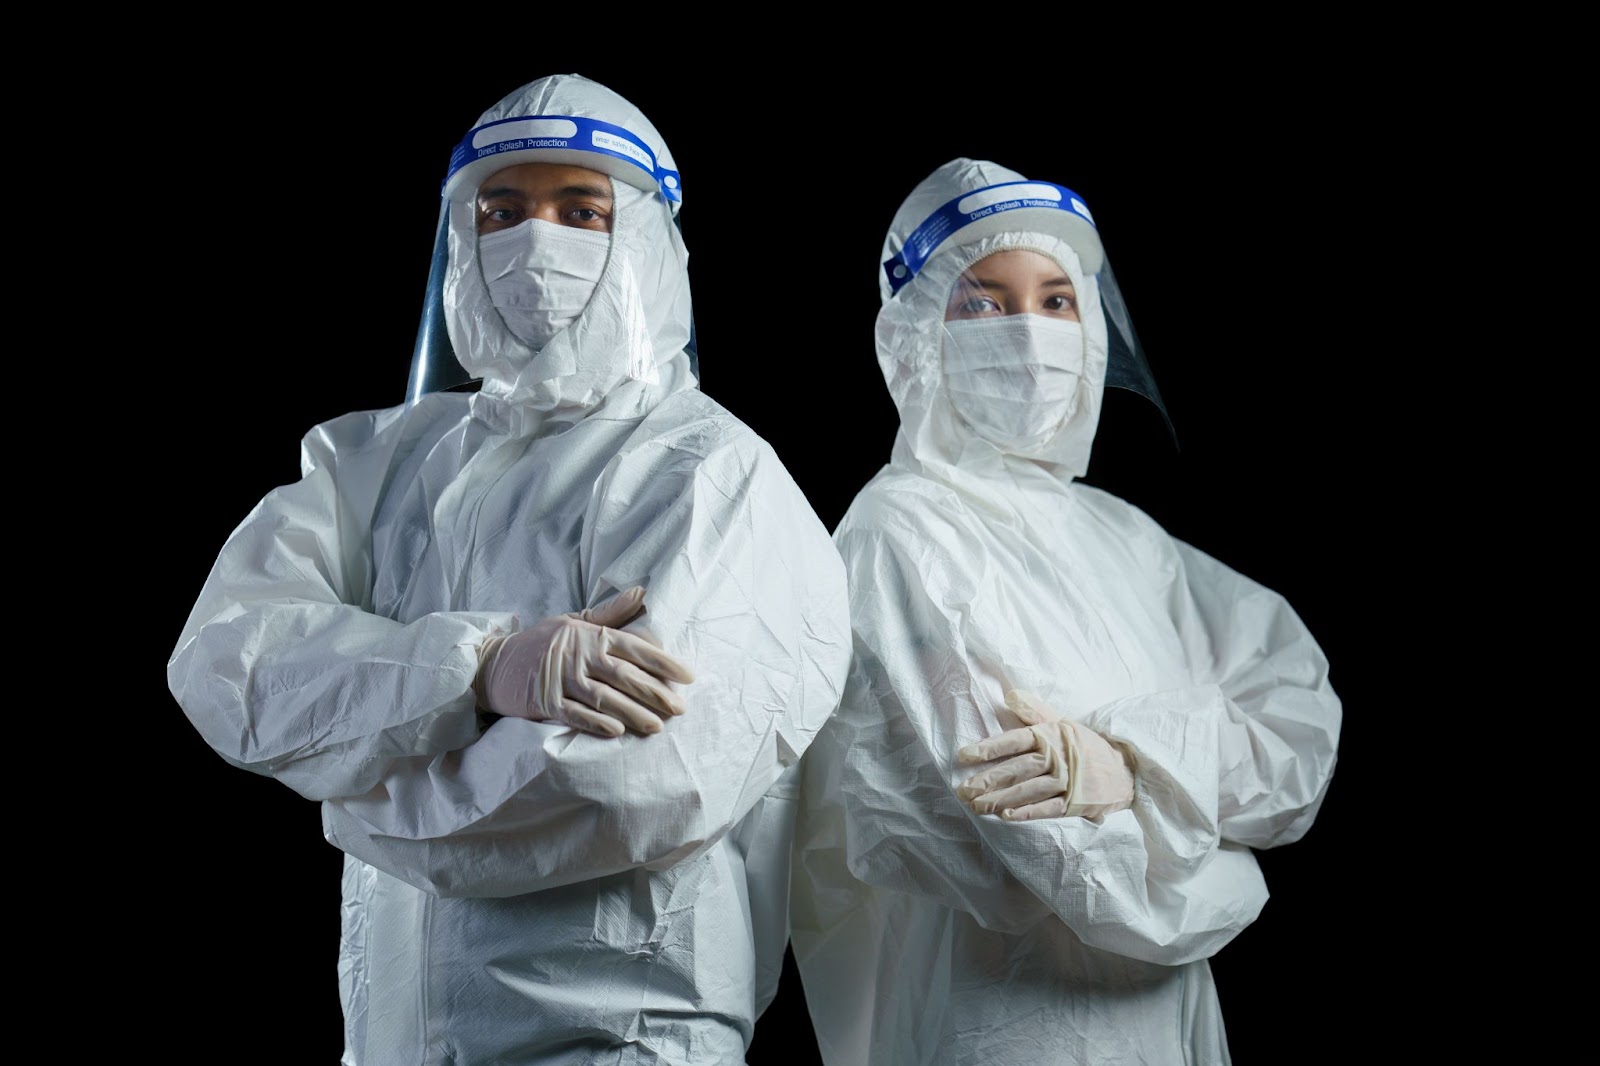 Two individuals in protective gear standing against a black backdrop